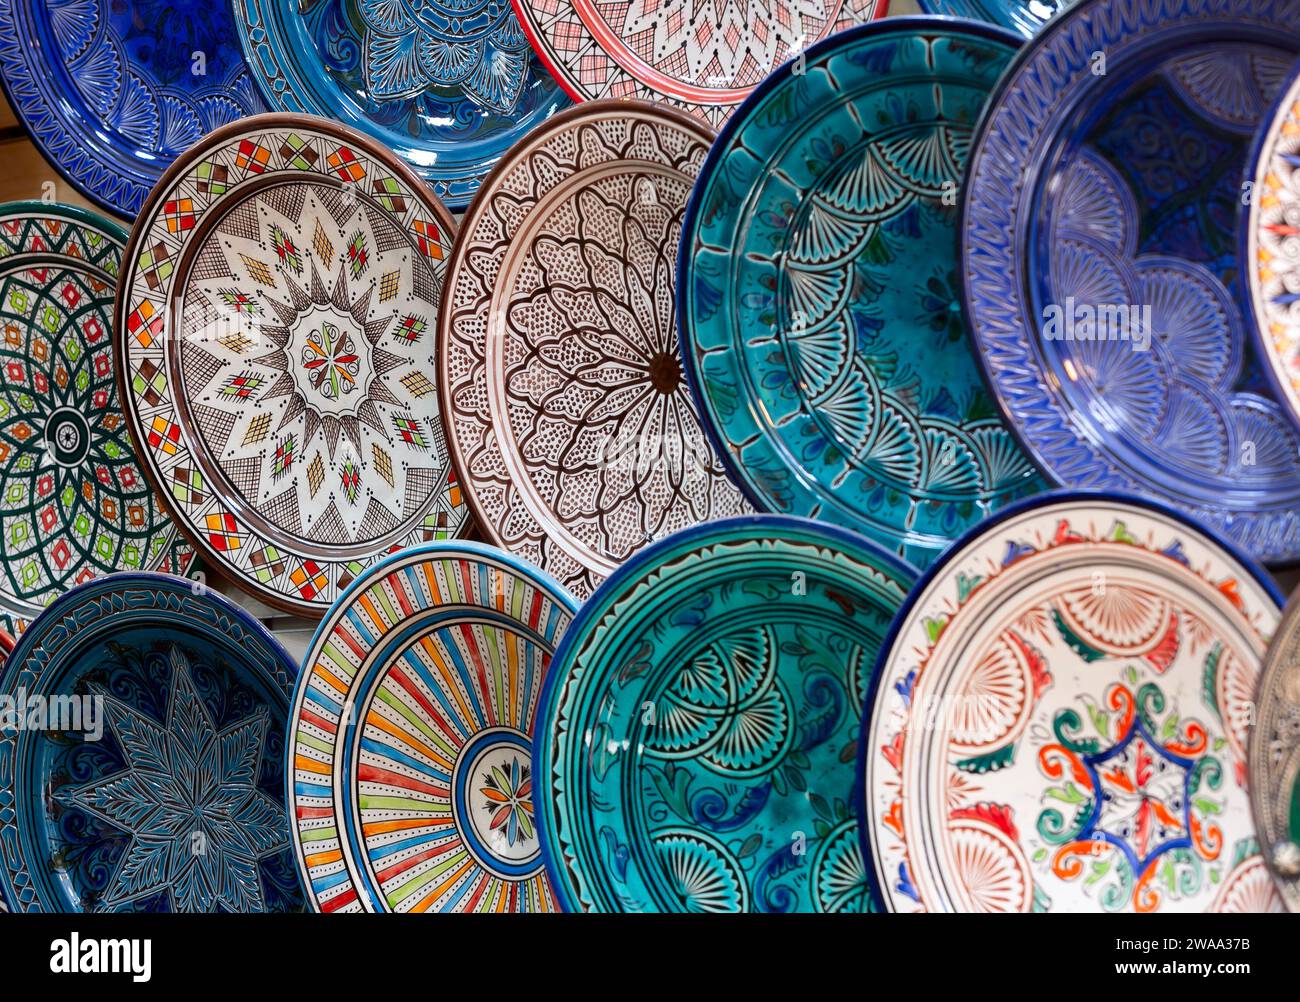 Beautiful and colorful ceramic plates for sale in Marrakech, Morocco. Stock Photo